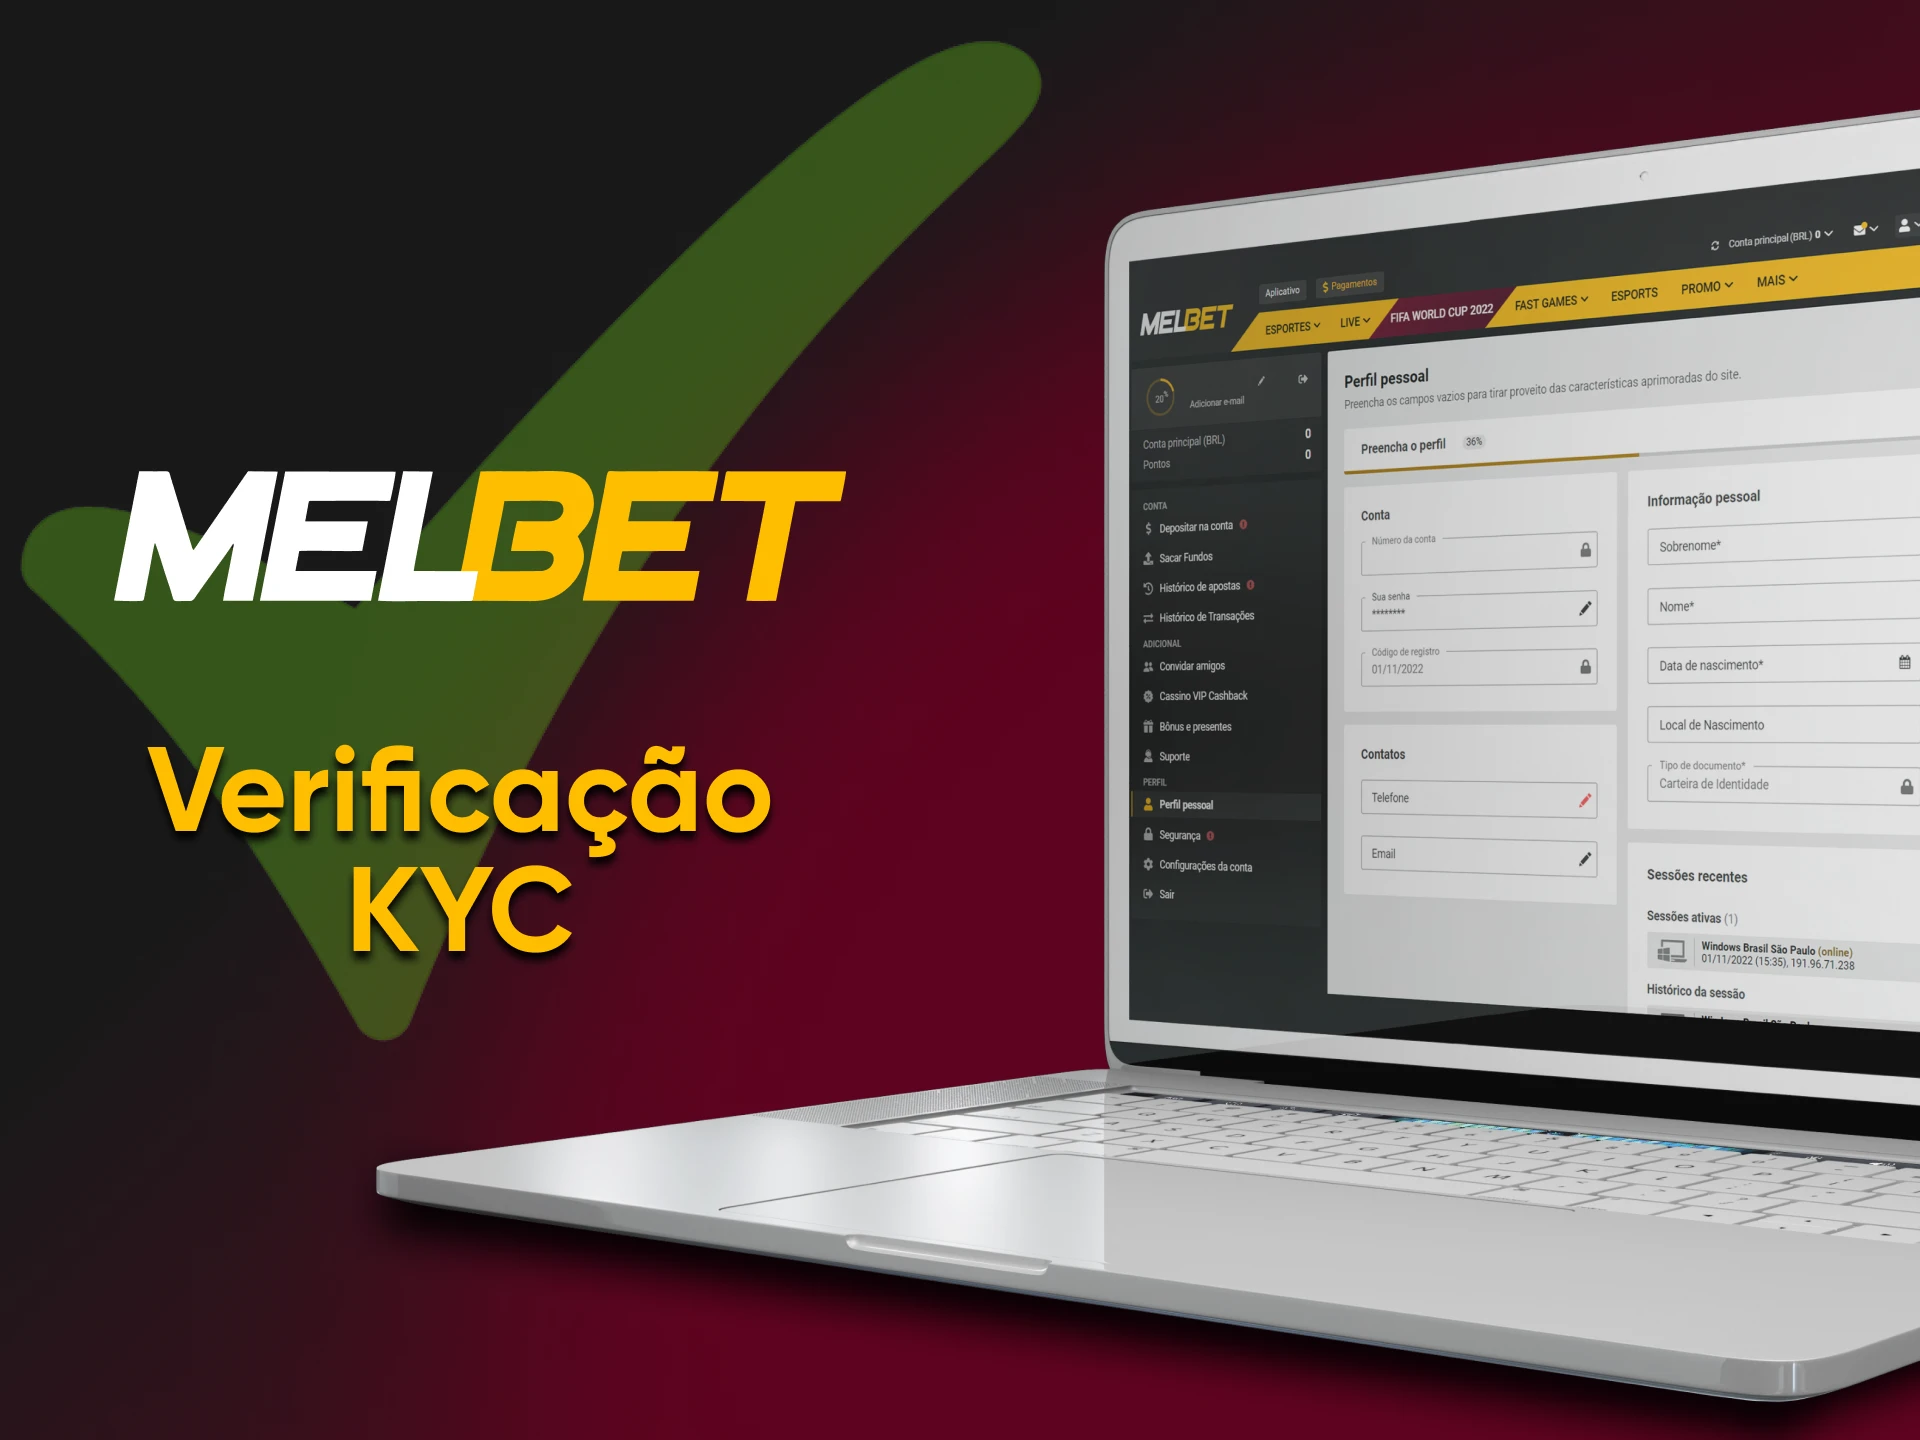 After joining Melbet, don't forget to verify your account.